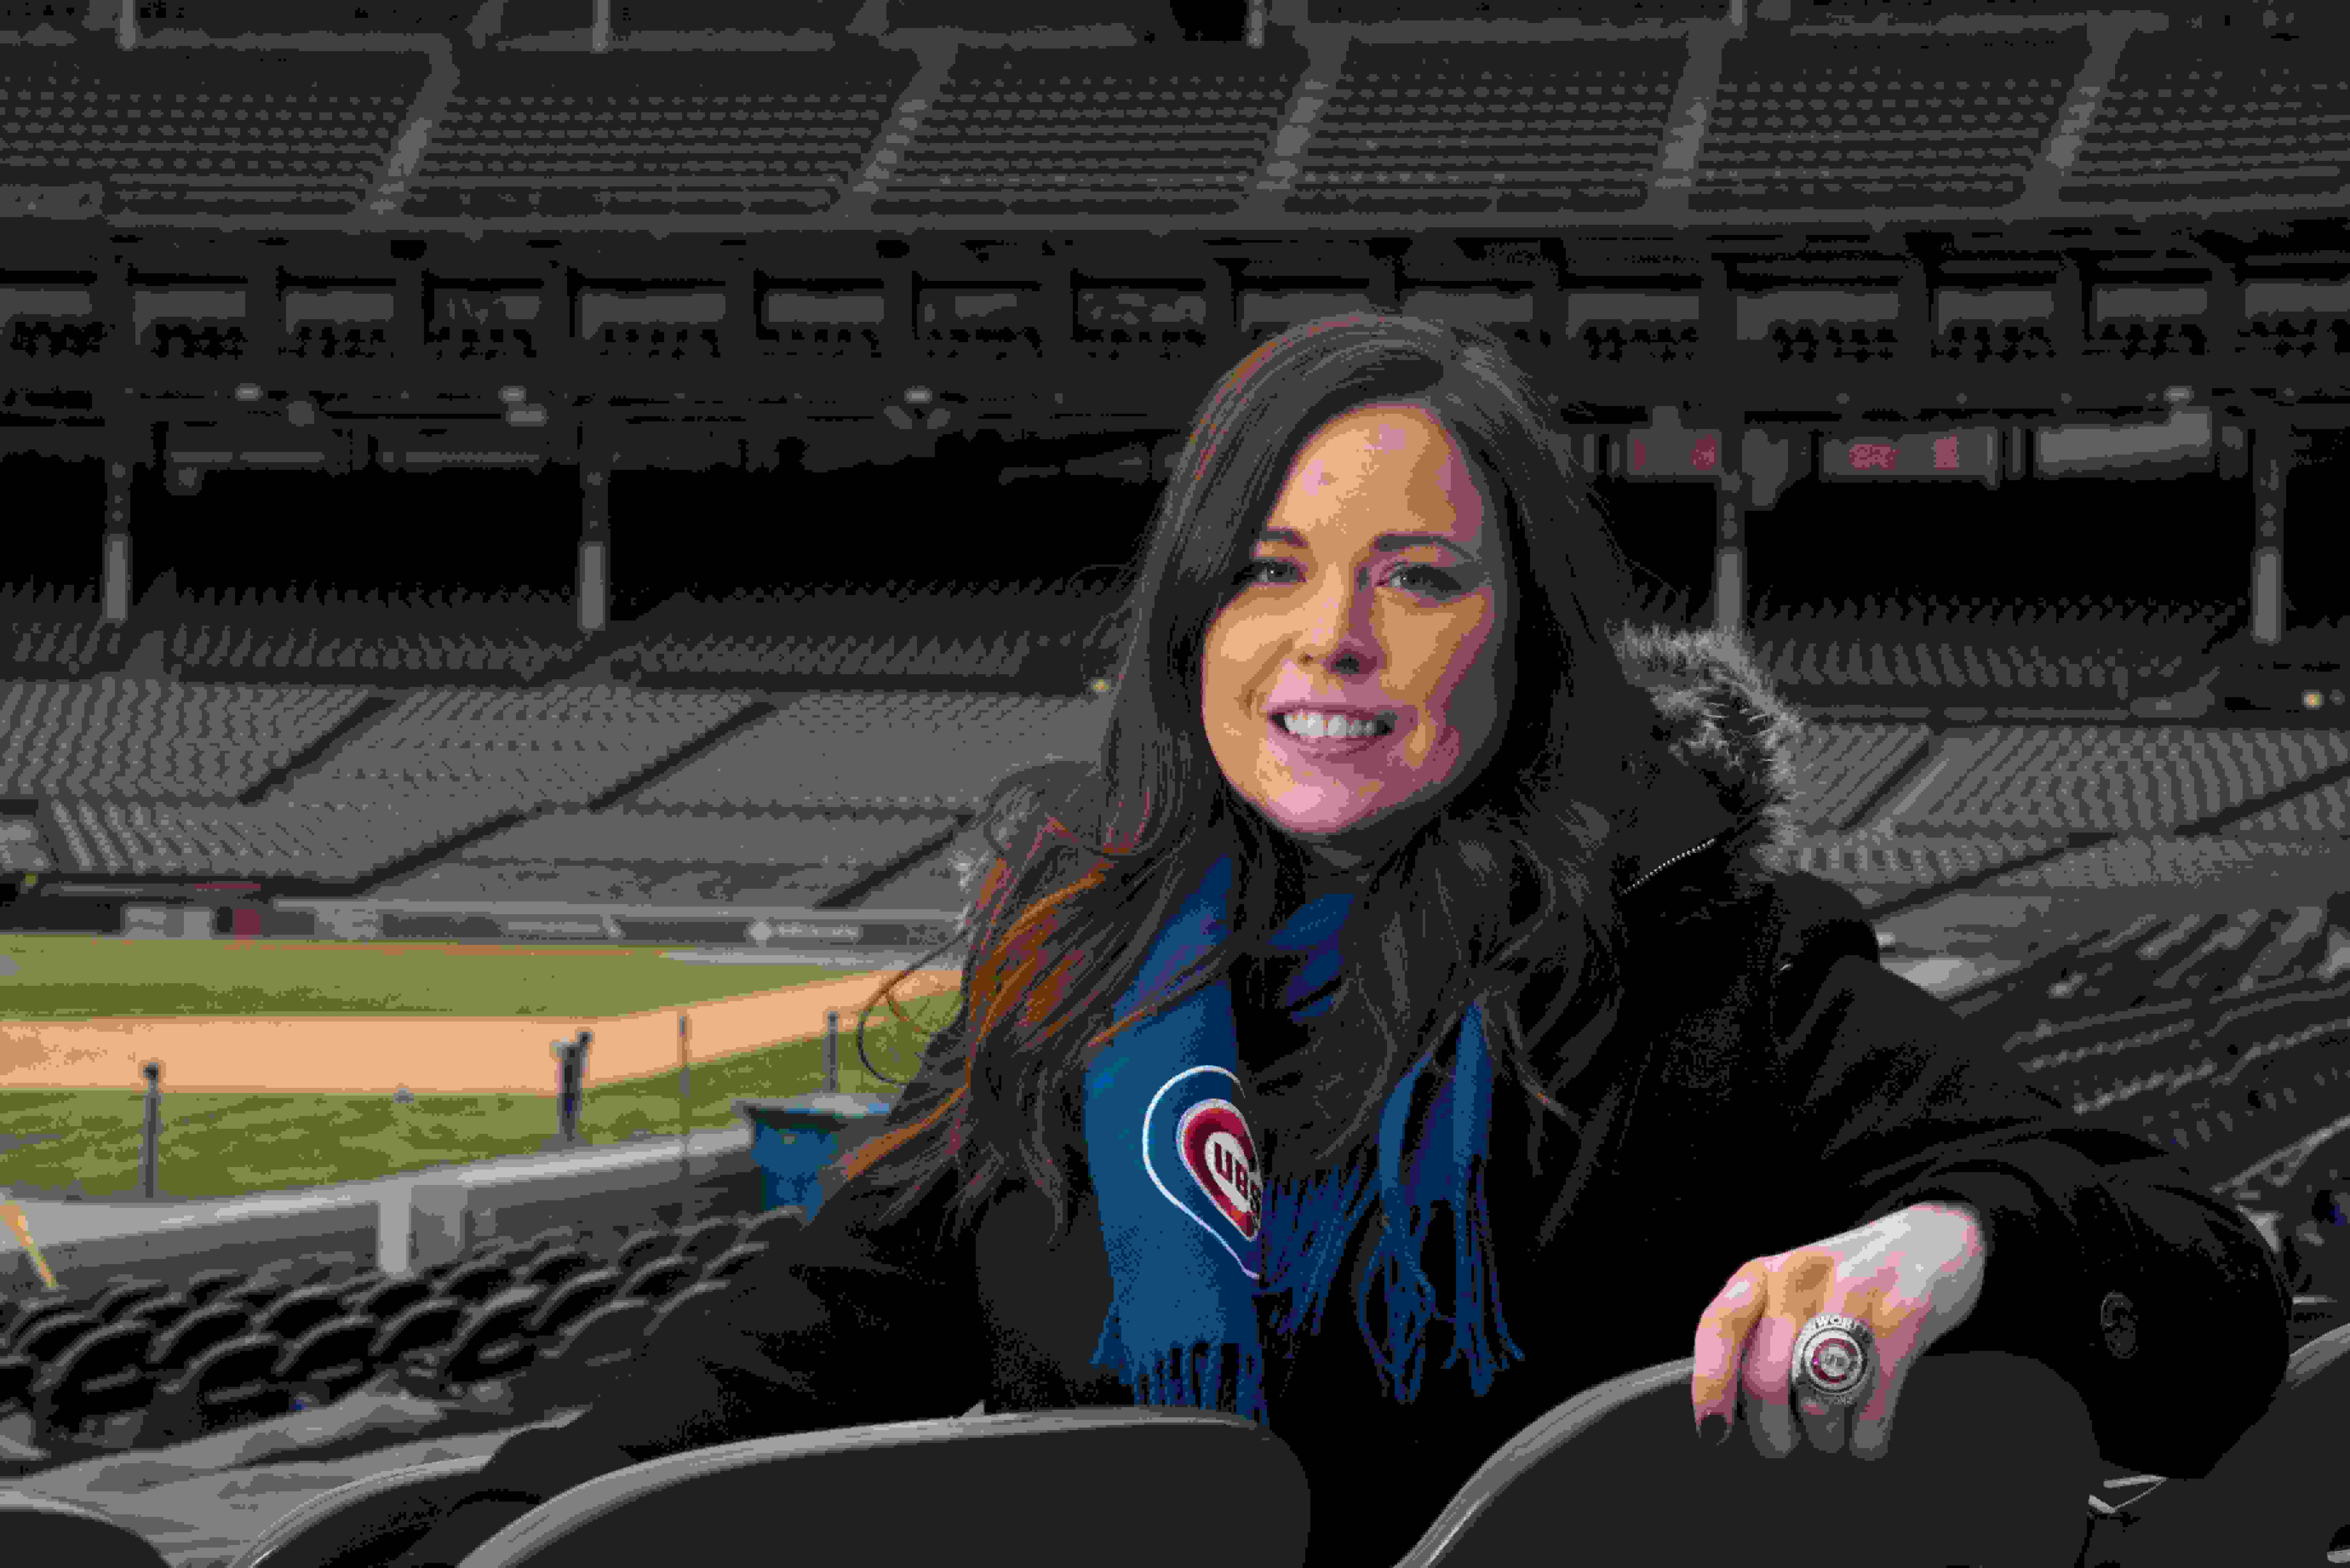 Kelly King sits in a green plastic seat in Wrigley Field. You can see the empty stadium behind her. She is smiling wearing a blue scarf with the Cubs logo and a large World Series ring on her left hand